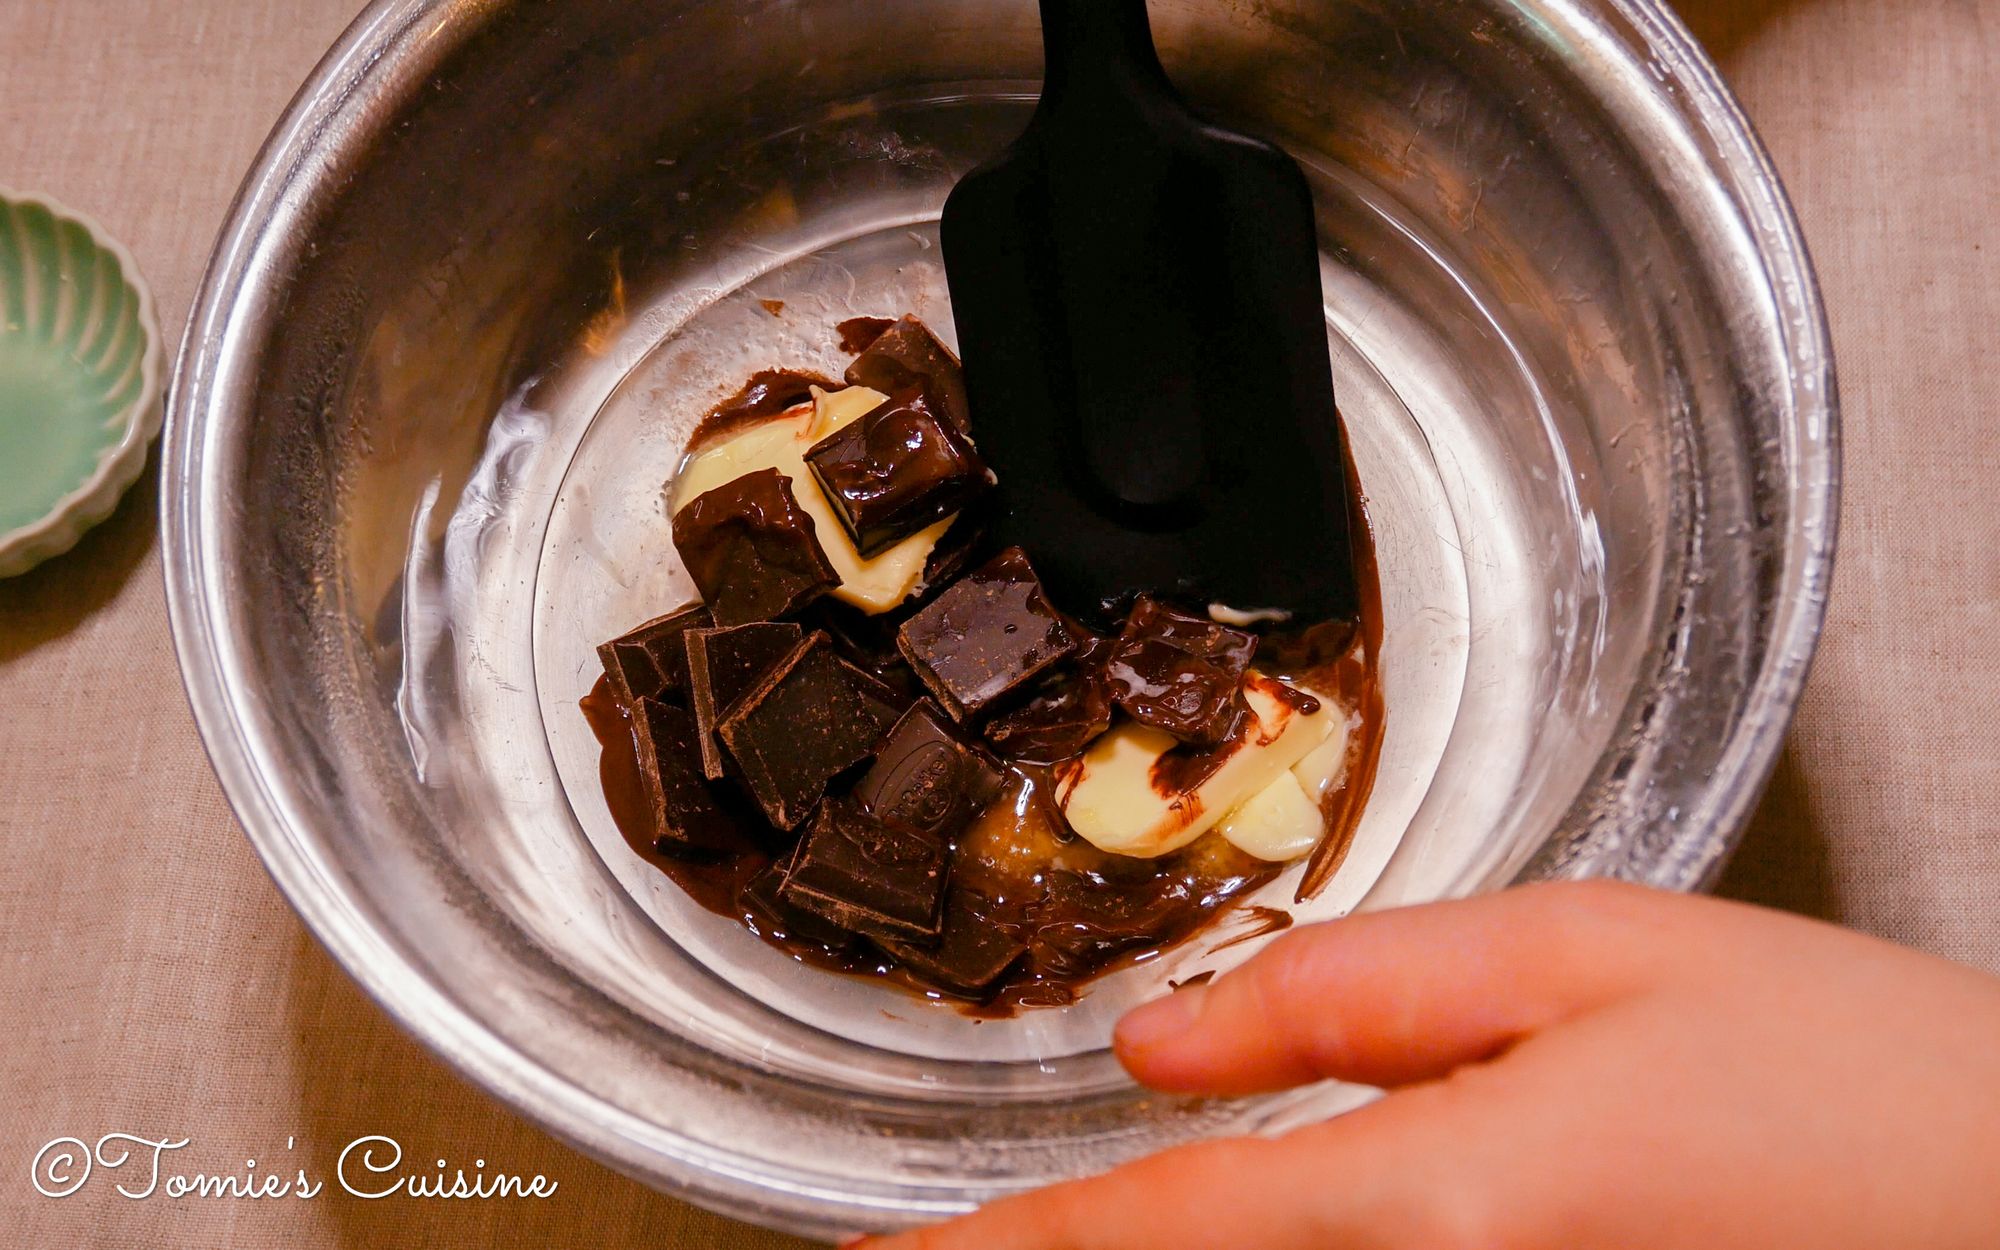 This black fondant is quick, easy, and delicious! It's a must try! #fo, Fondant Recipe